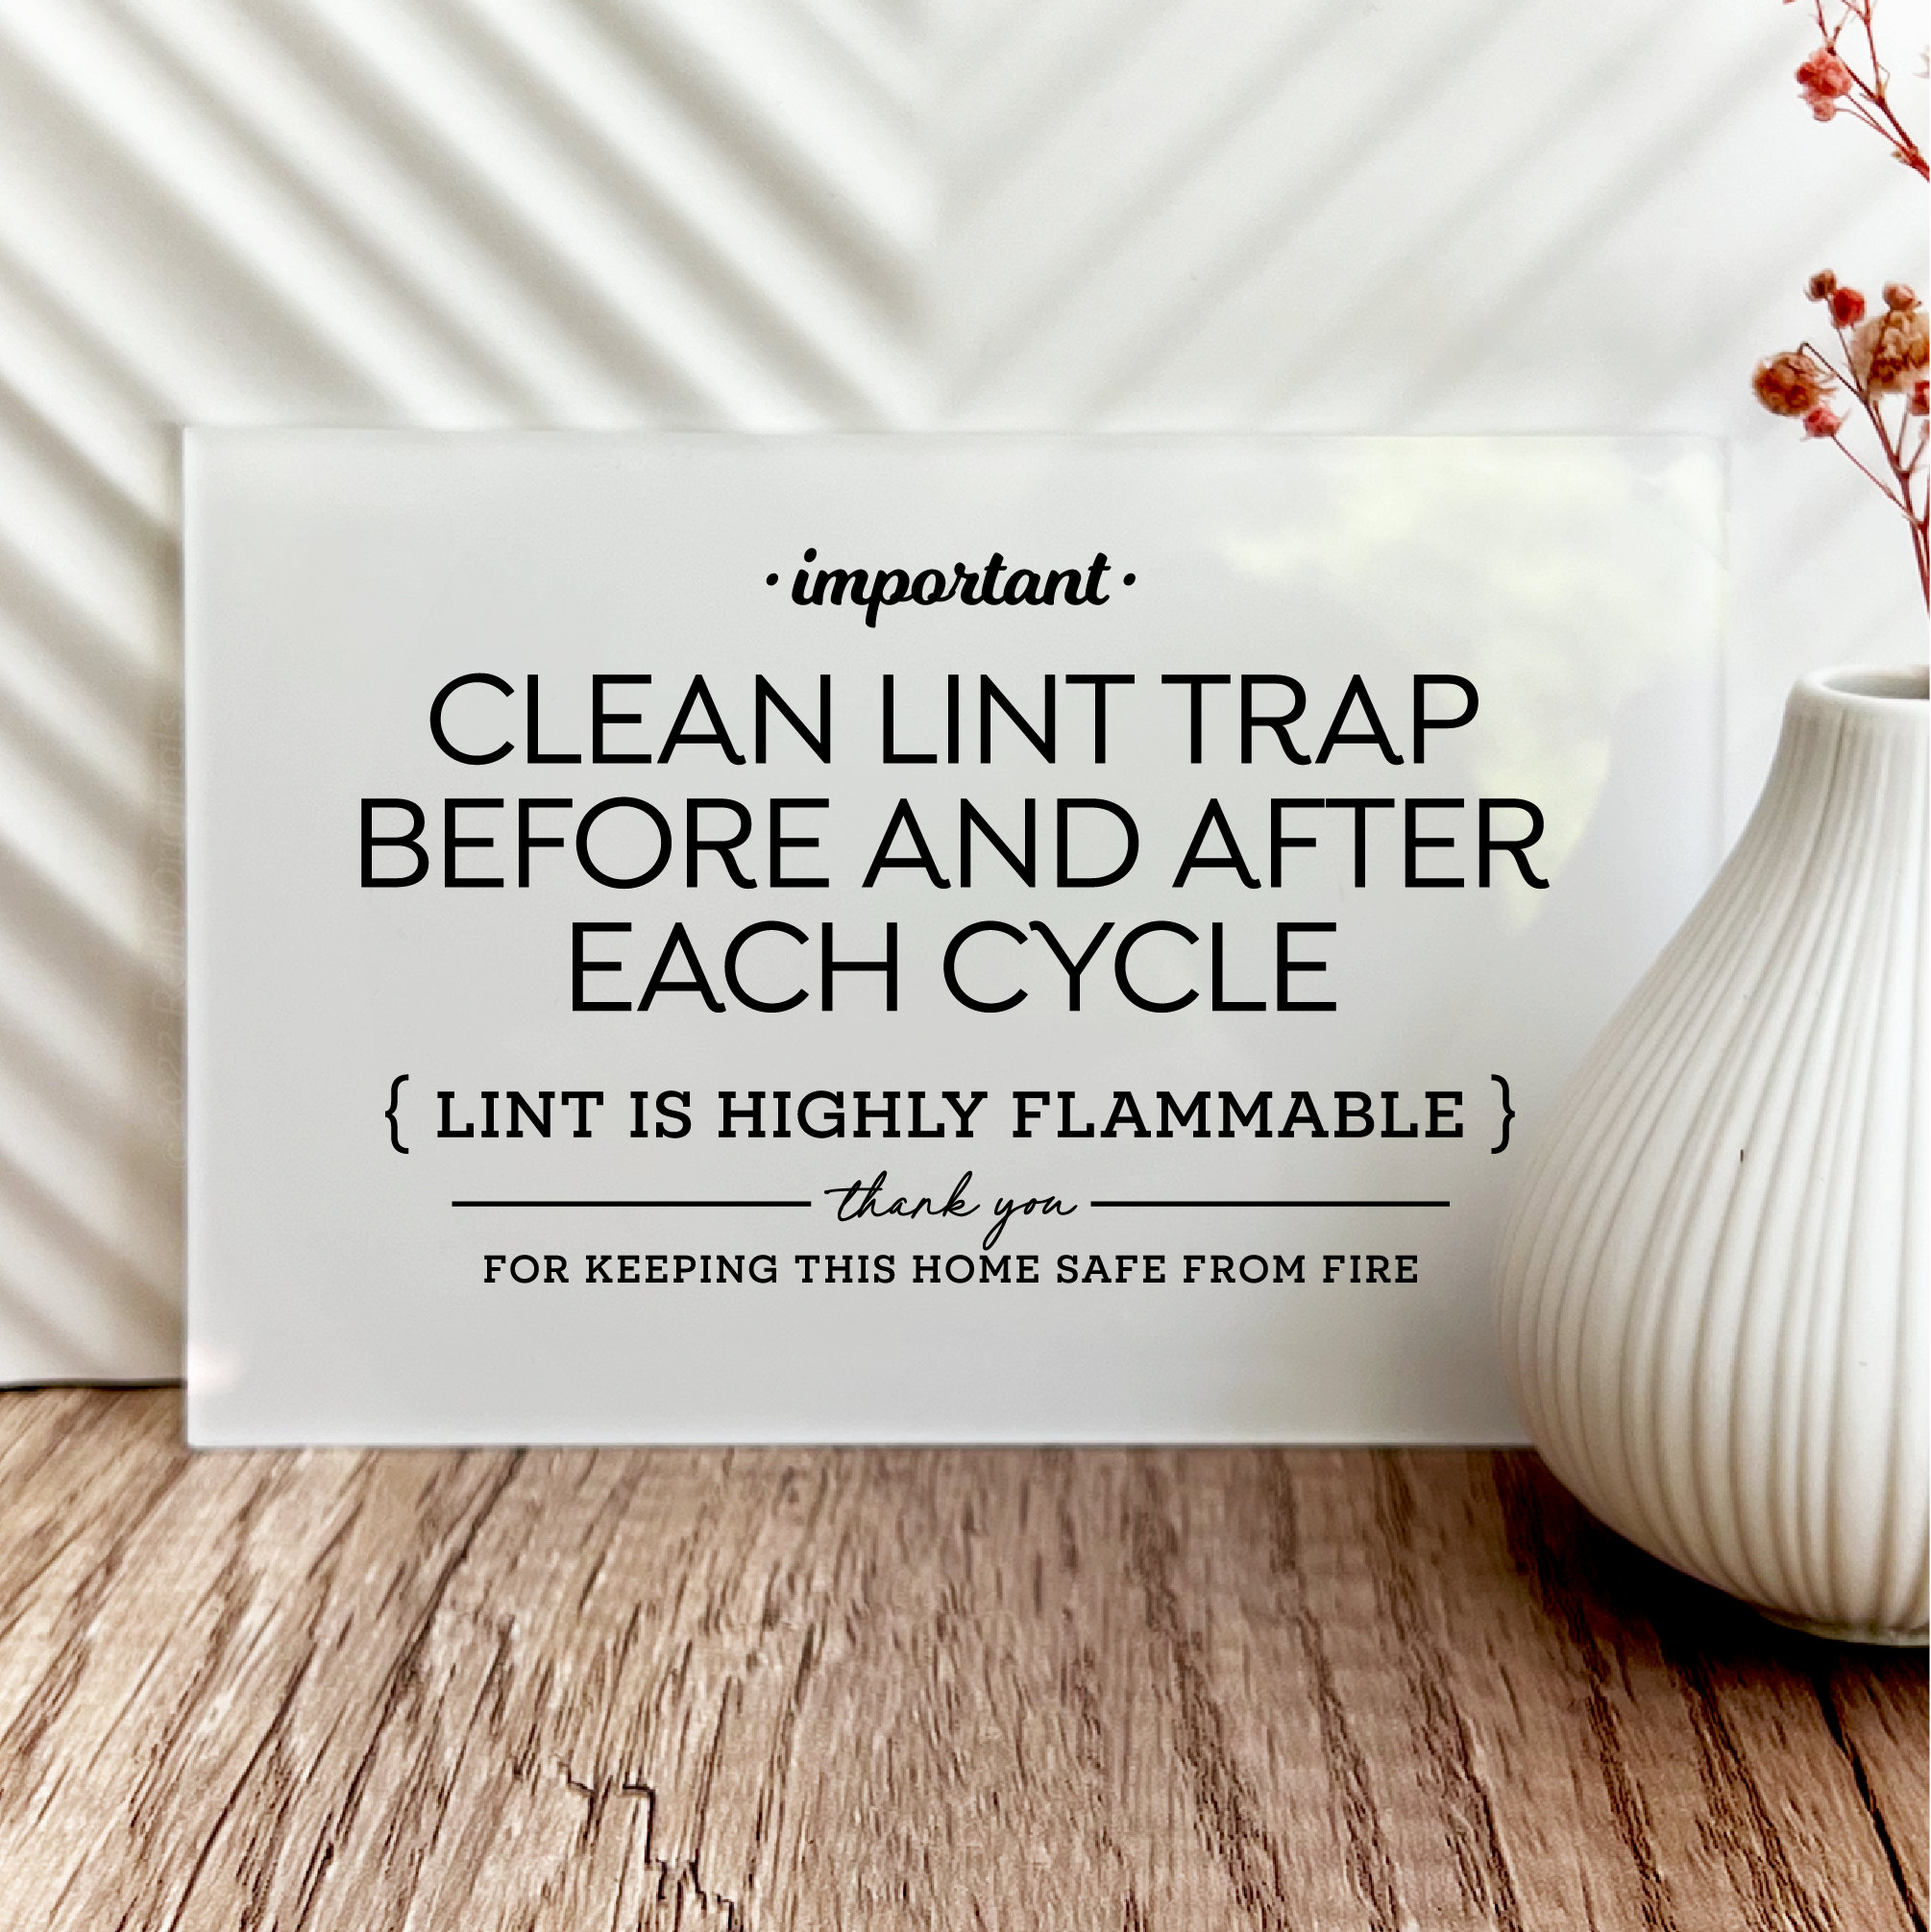 Reilly Originals Clean Lint Trap Before & After Each Cycle Laundry Room  Safety Sign & Reviews